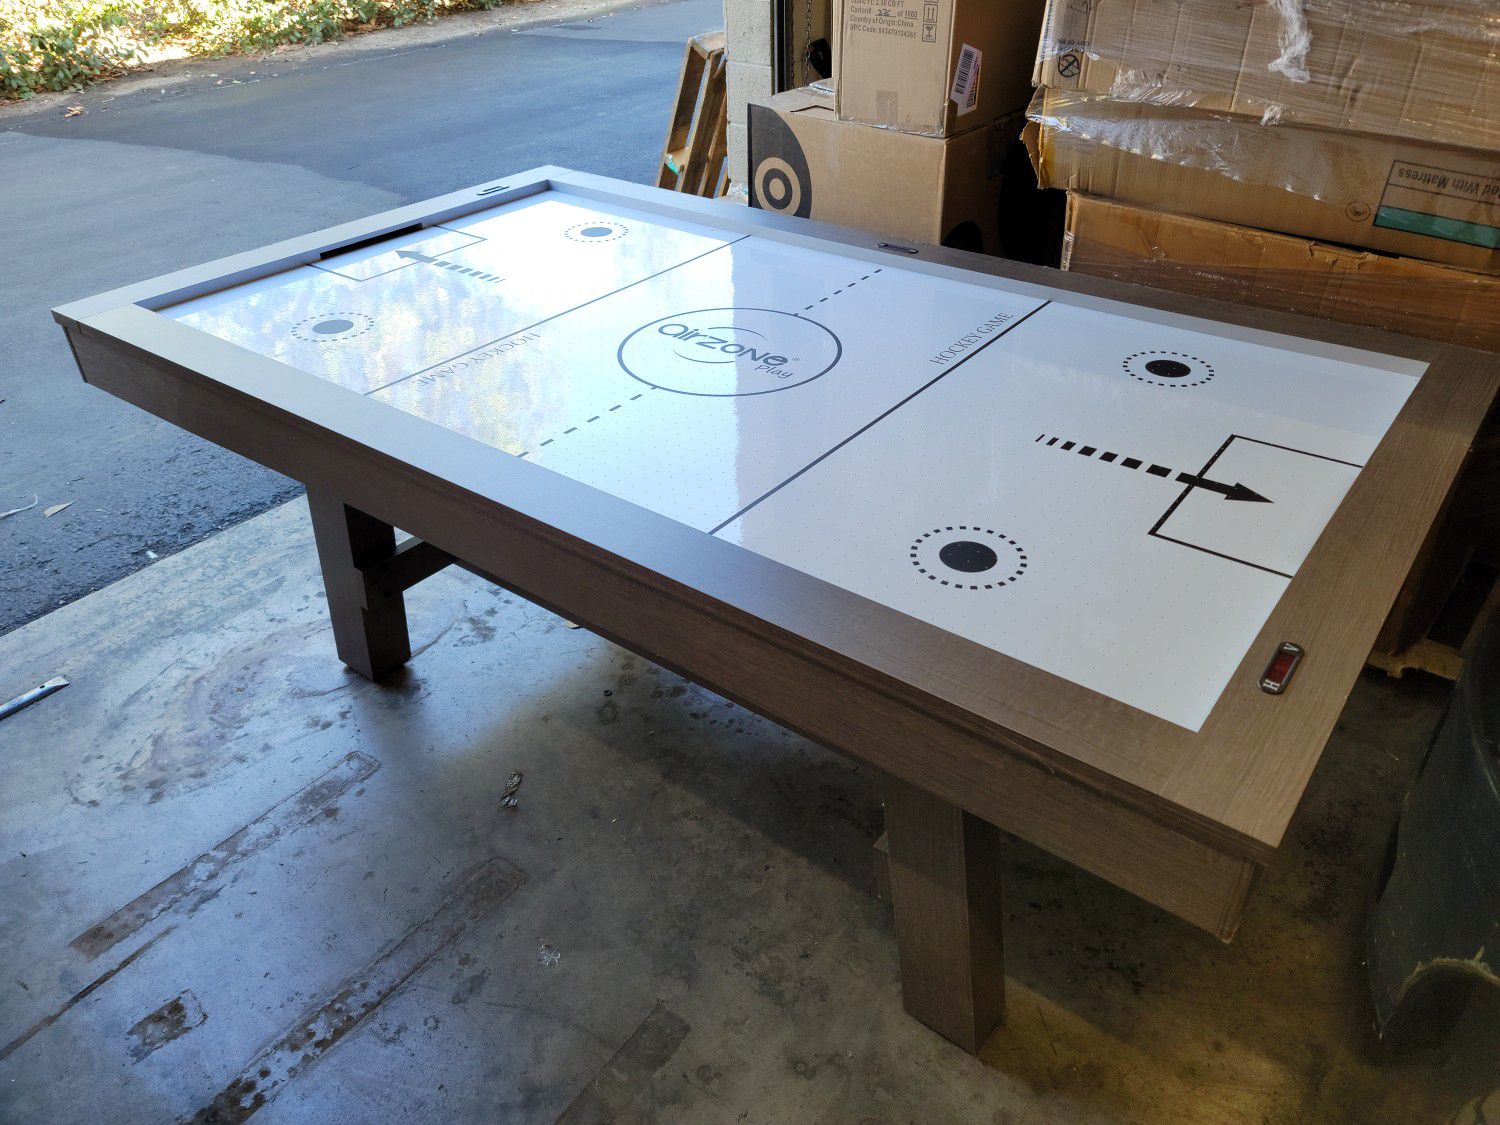 AirZone air Hockey table. 4'x7'x32". Has a few cosmetic flaws, does not affect play. Paddles and puck not included. $200 FIRM